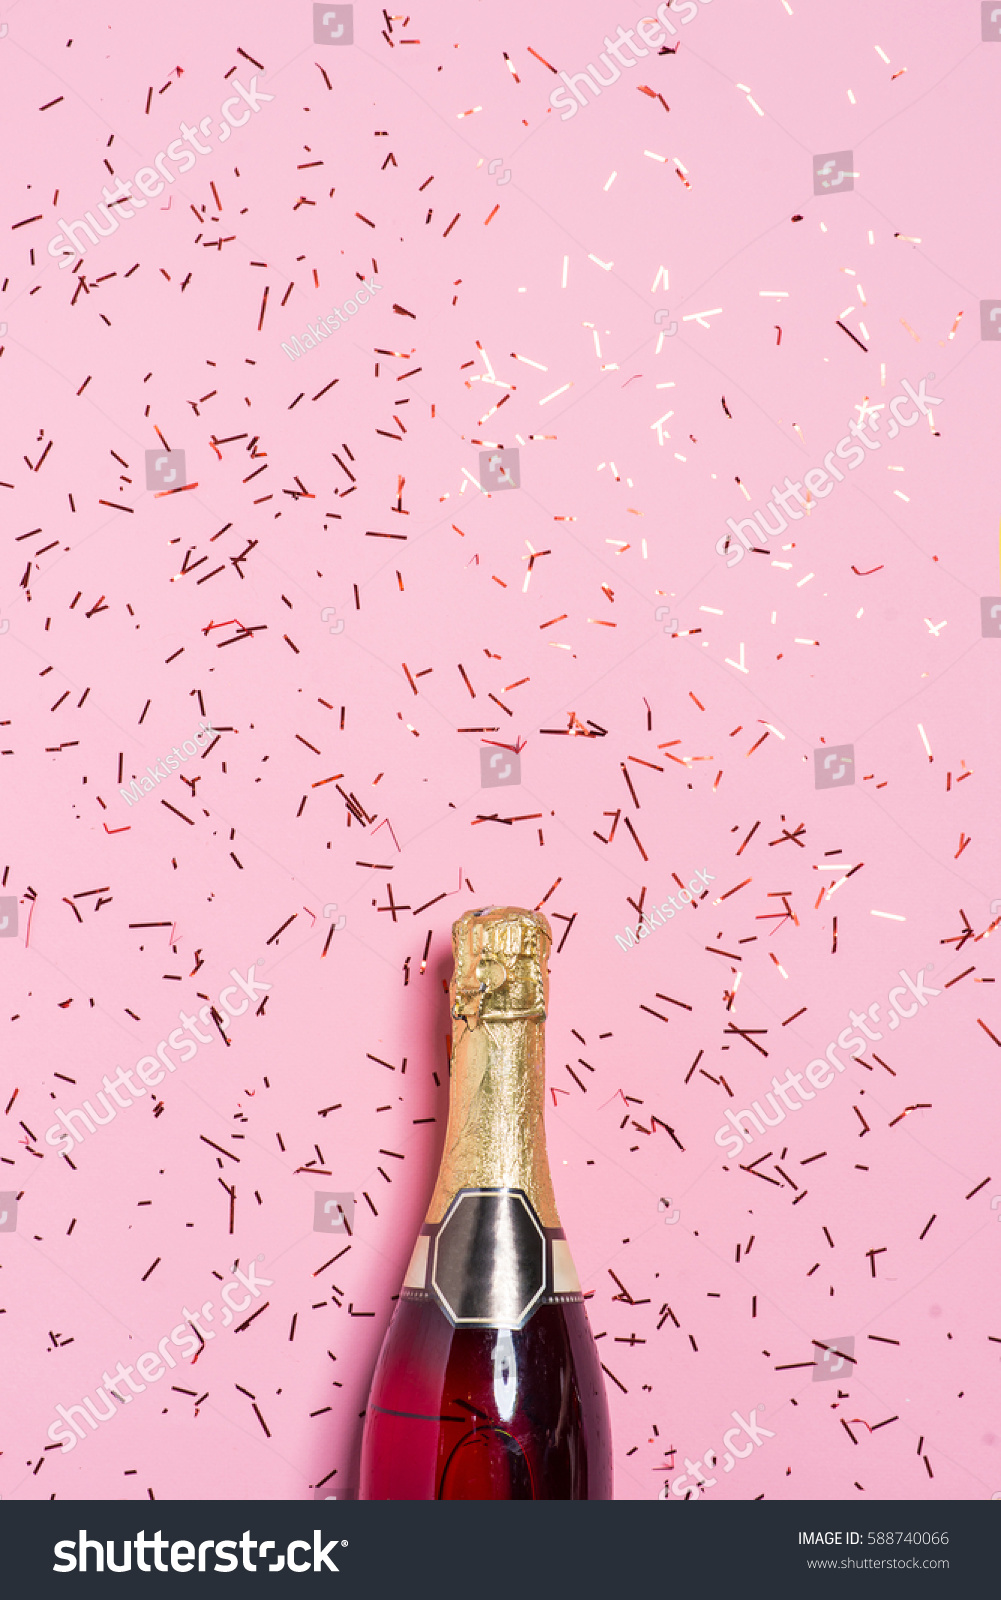 Download Flat Lay Celebration Champagne Bottle Colorful Backgrounds Textures Stock Image 588740066 PSD Mockup Templates